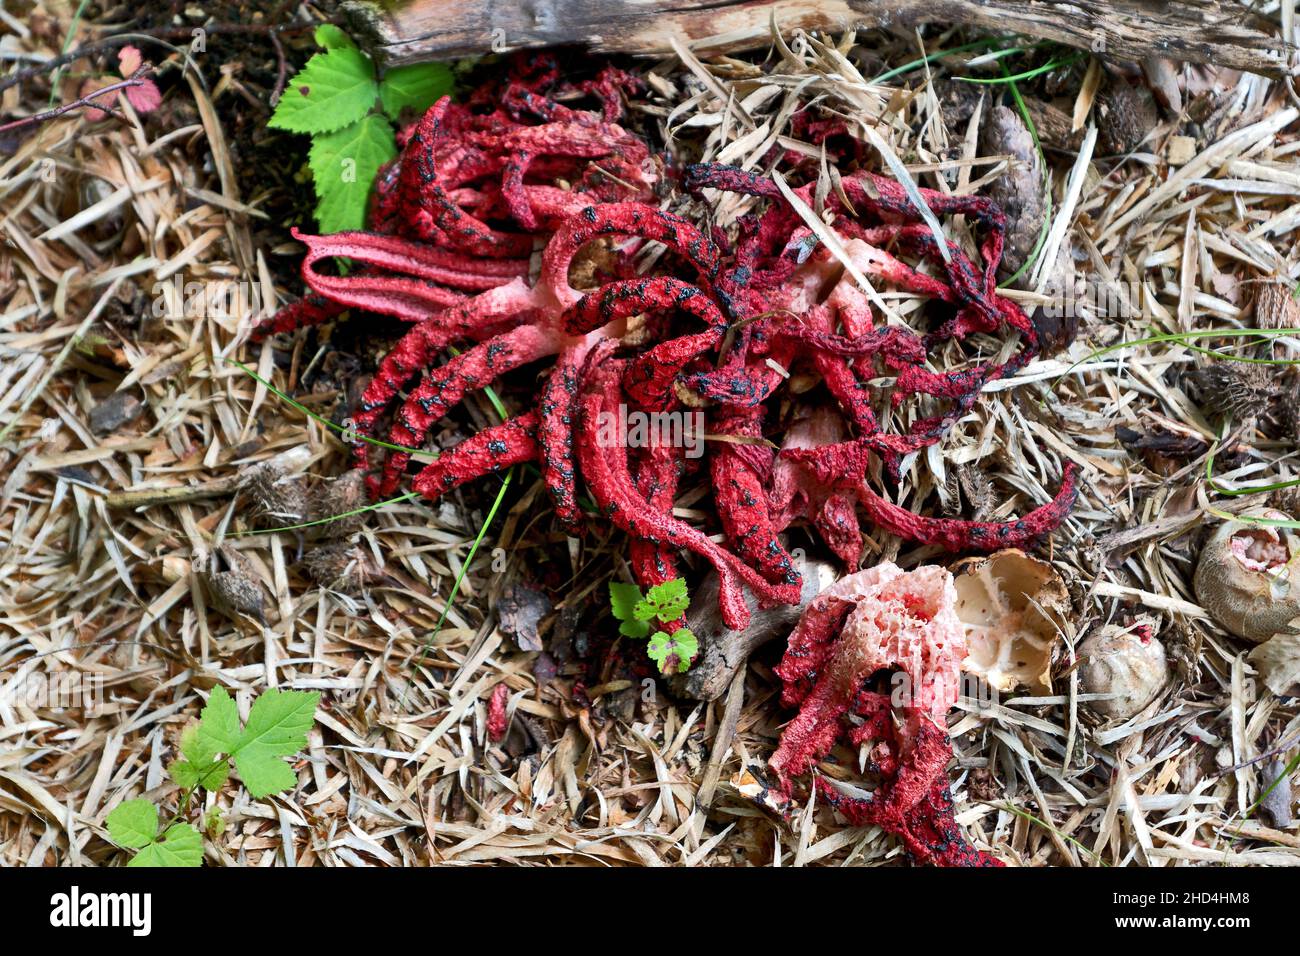 Clathrus archeri (octopus stinkhorn, devil's fingers) is a fungus which covered with olive-brown slimy gleba, containing spores, that attracts flies. Stock Photo